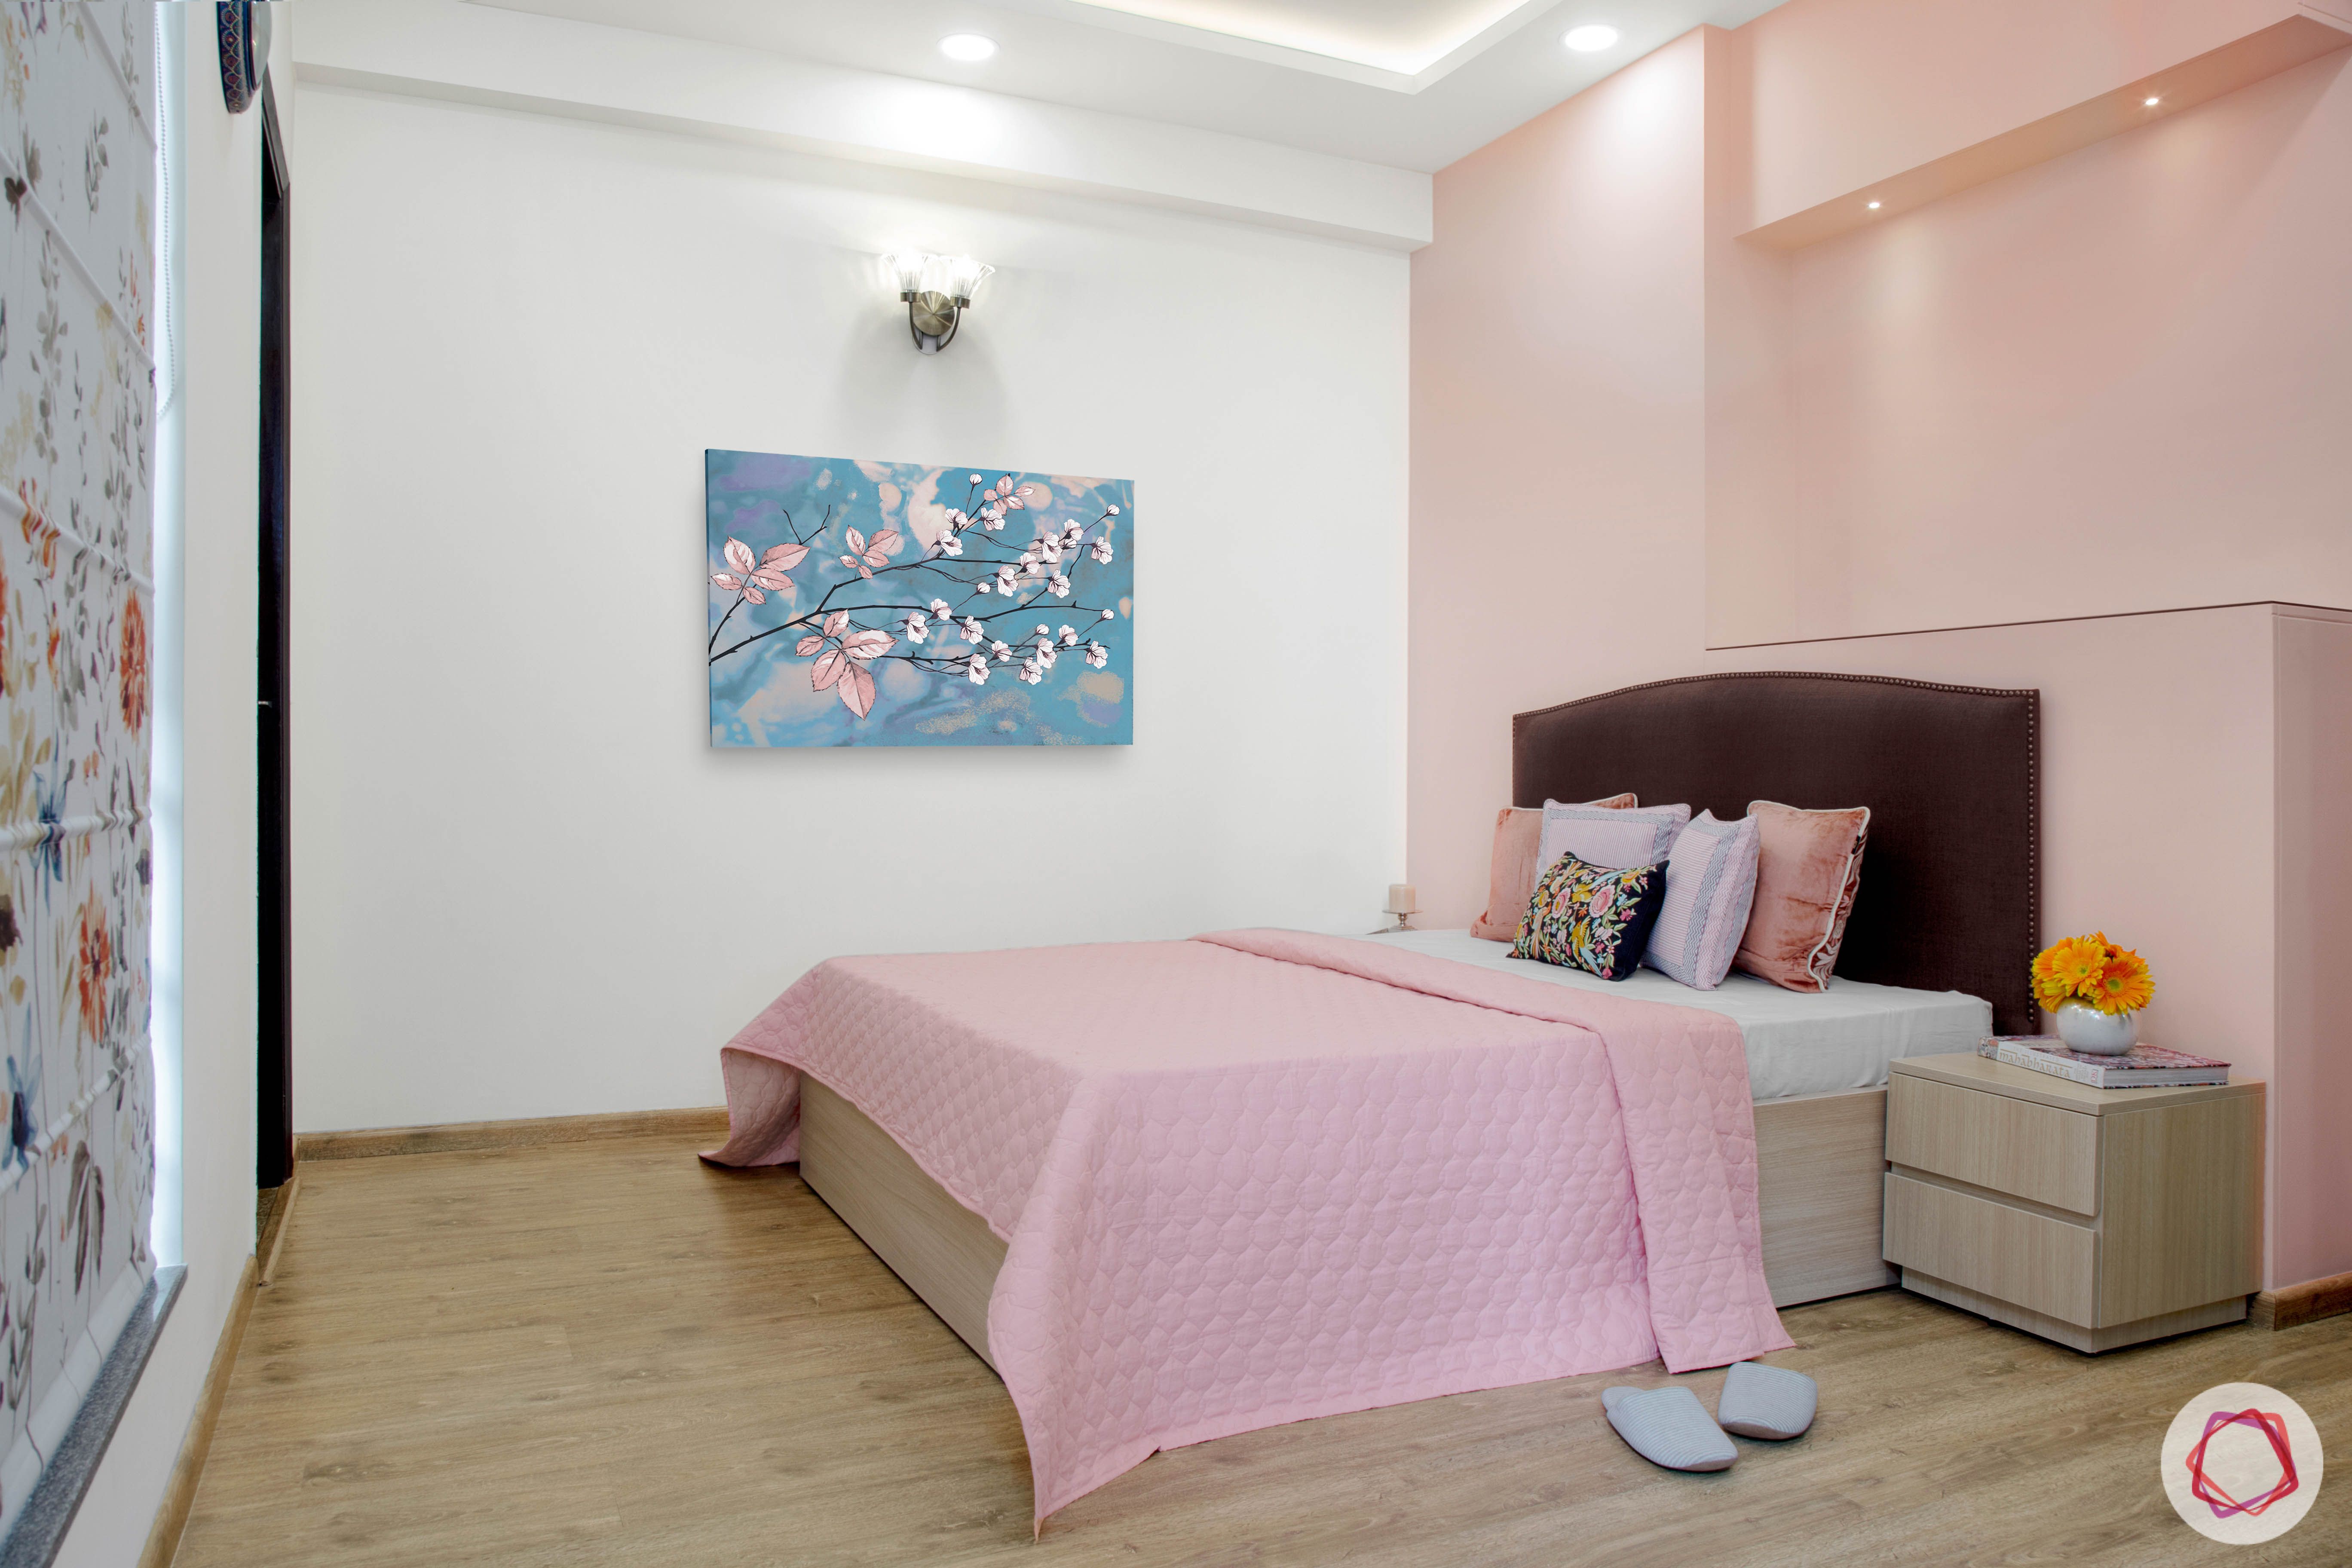 Cleo county noida_peach pink room full view